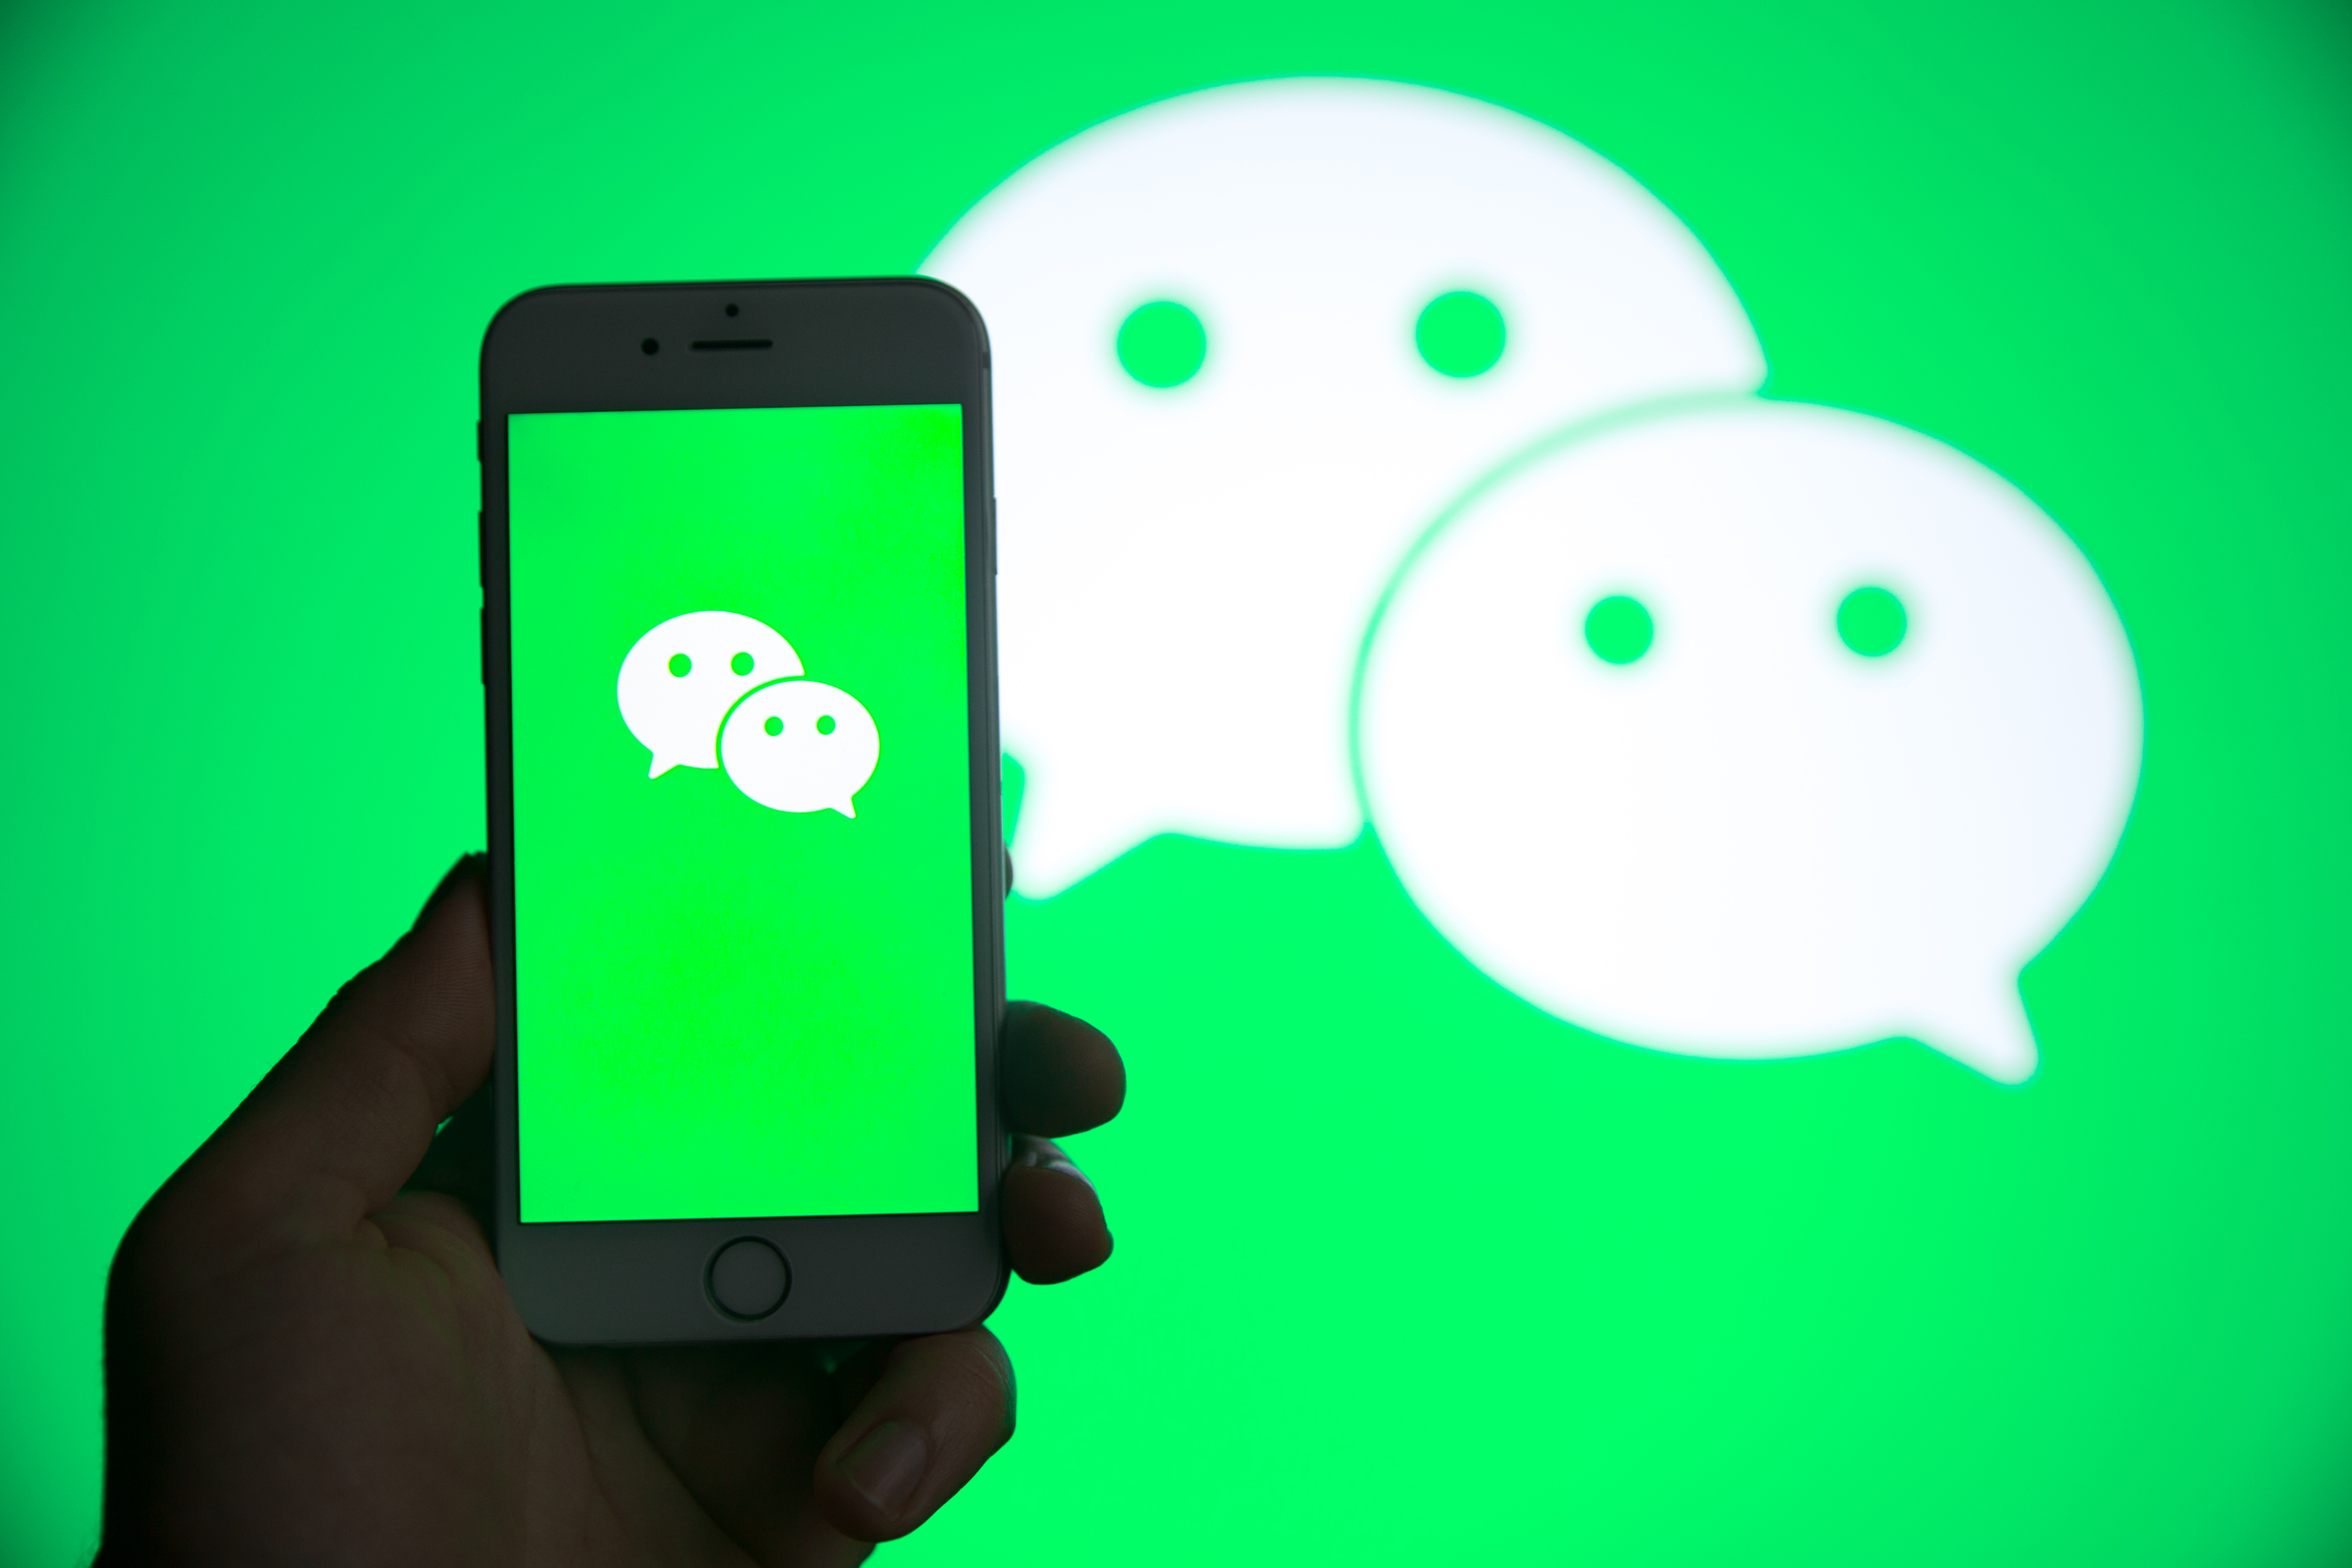 Tencent’s WeChat super app to revamp its search function, challenging Baidu and Bytedance